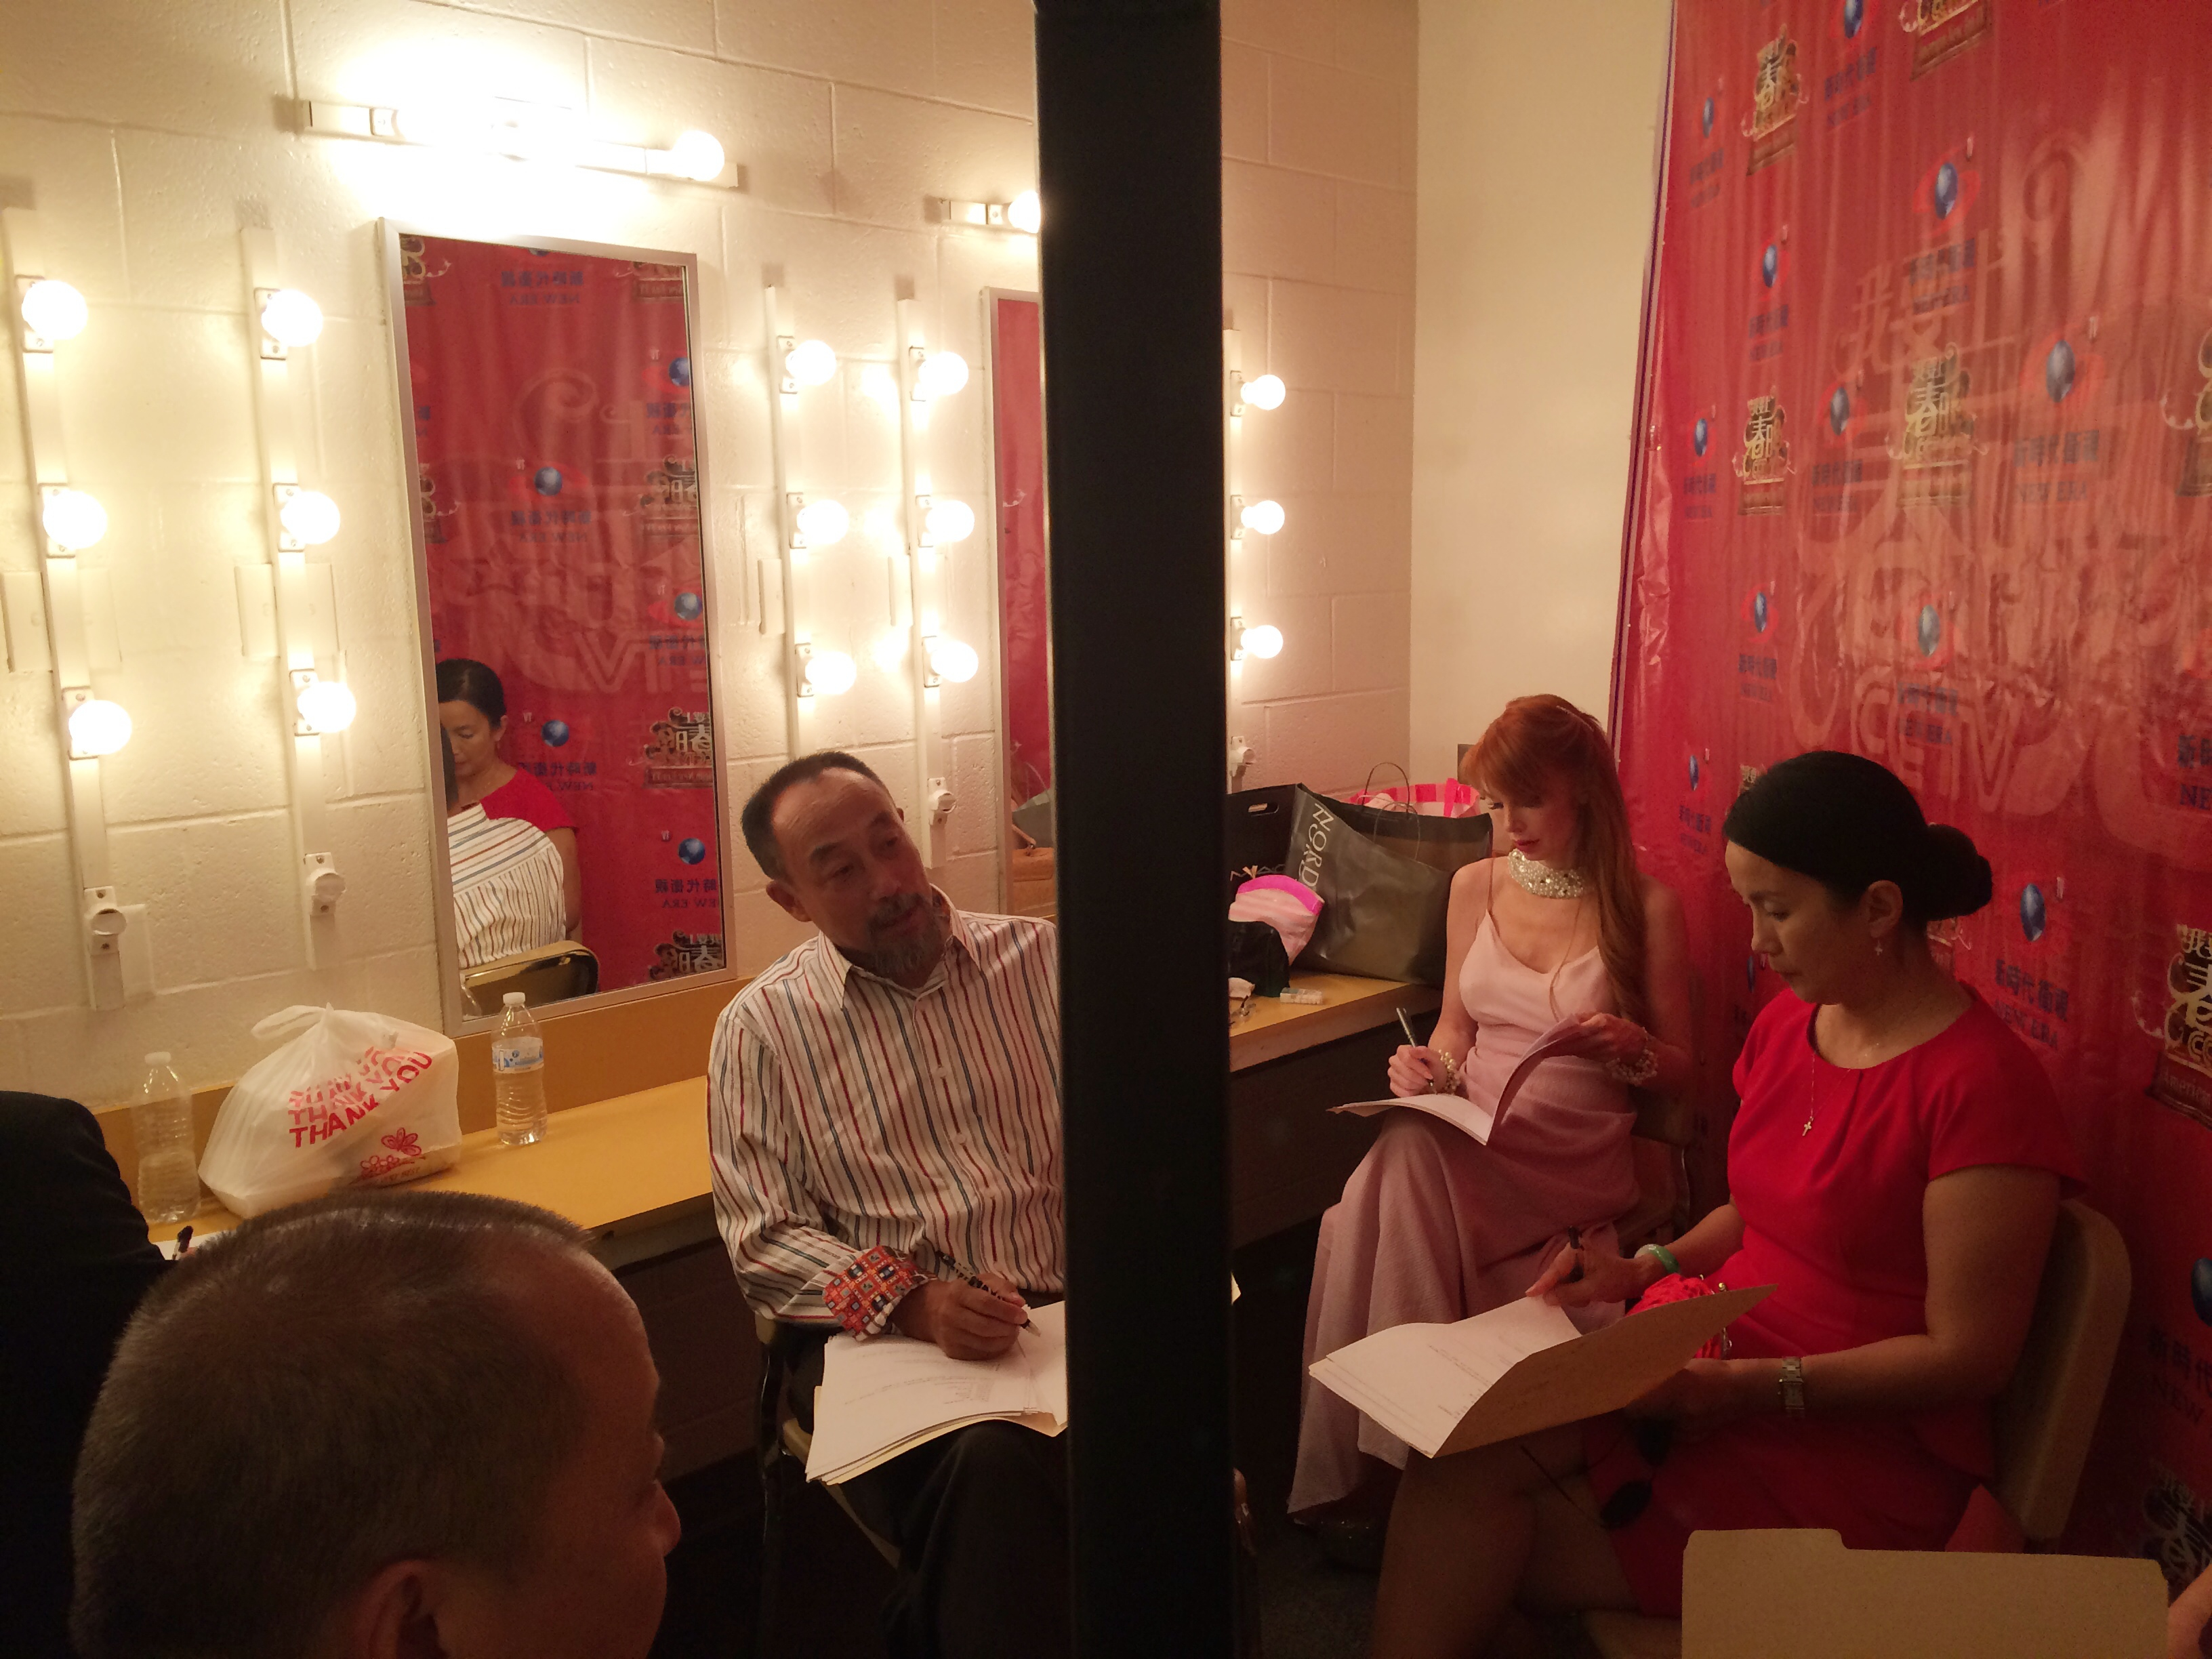 CCTV Judges backstage for National USA Competition for Chinese New Year Gala. Haiying Sun, Liping Lu, Kimberley Kates